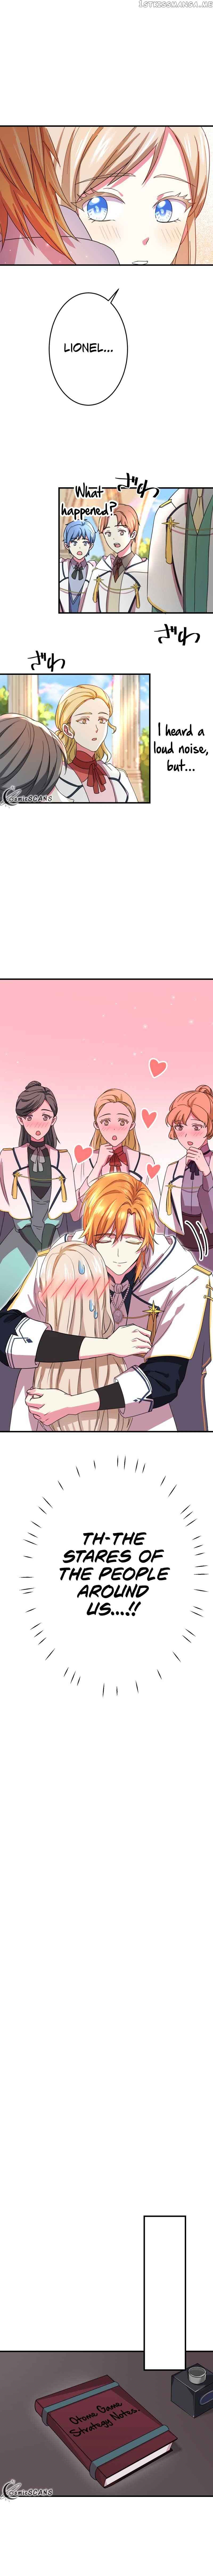 Even though I become a side character, I’m being adored by an overprotective duke chapter 14